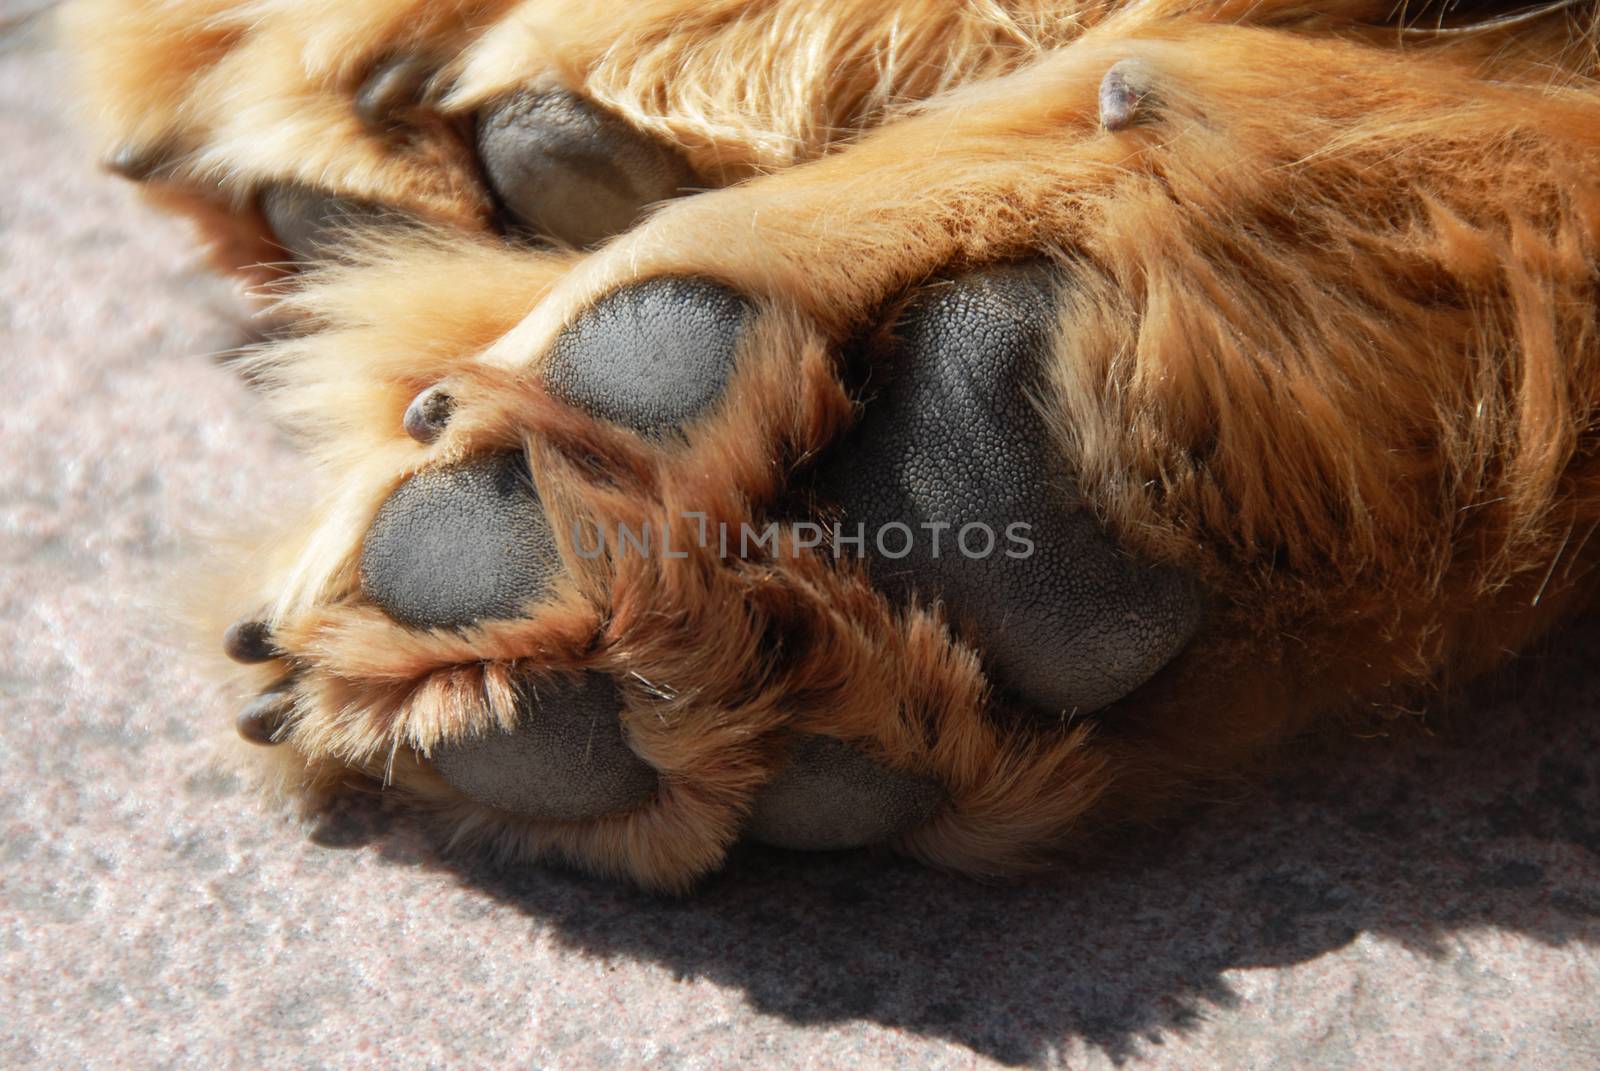 Paw of sleeping dog by simply